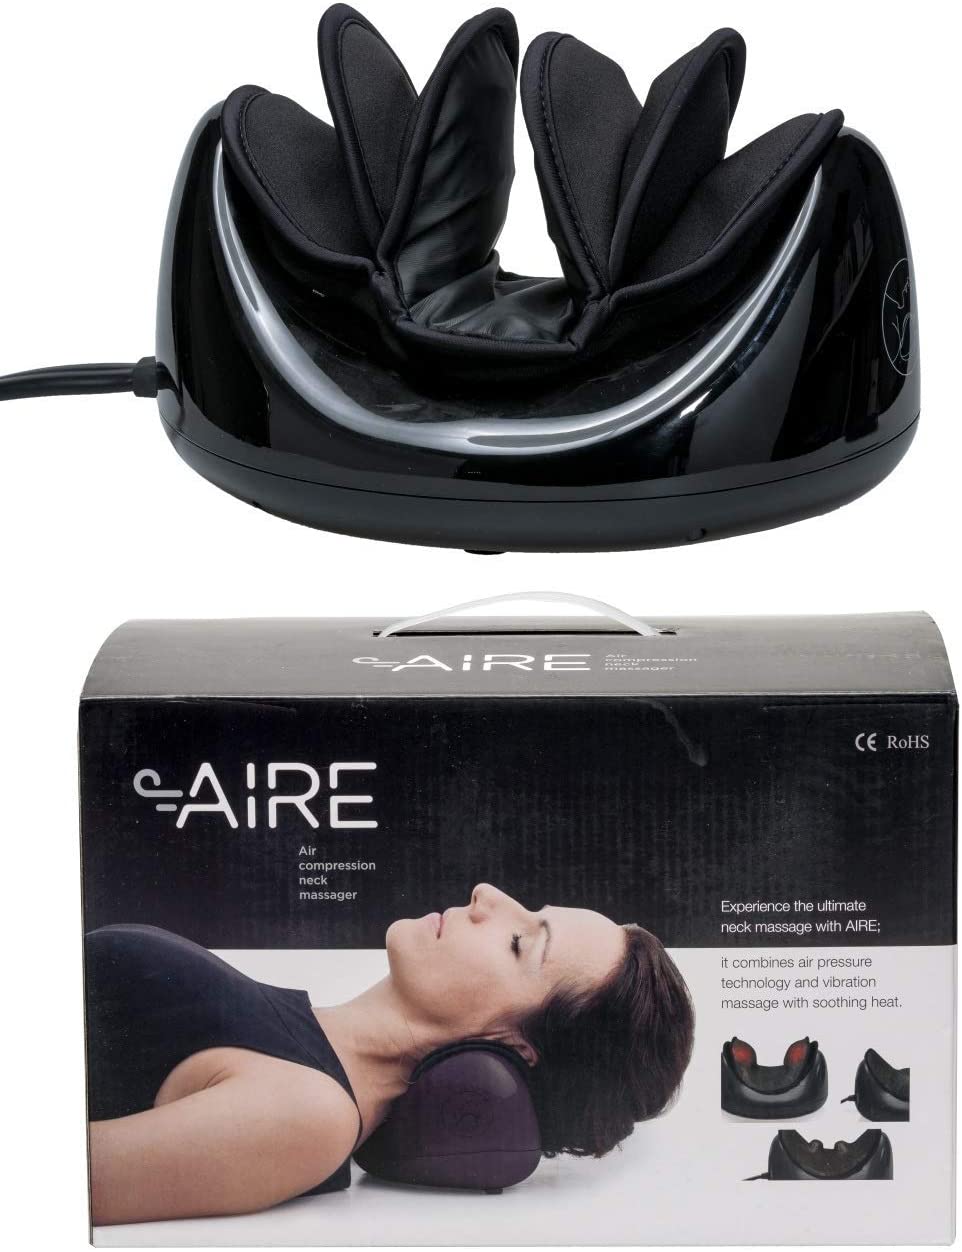 What are some of the best hot massagers for pain?